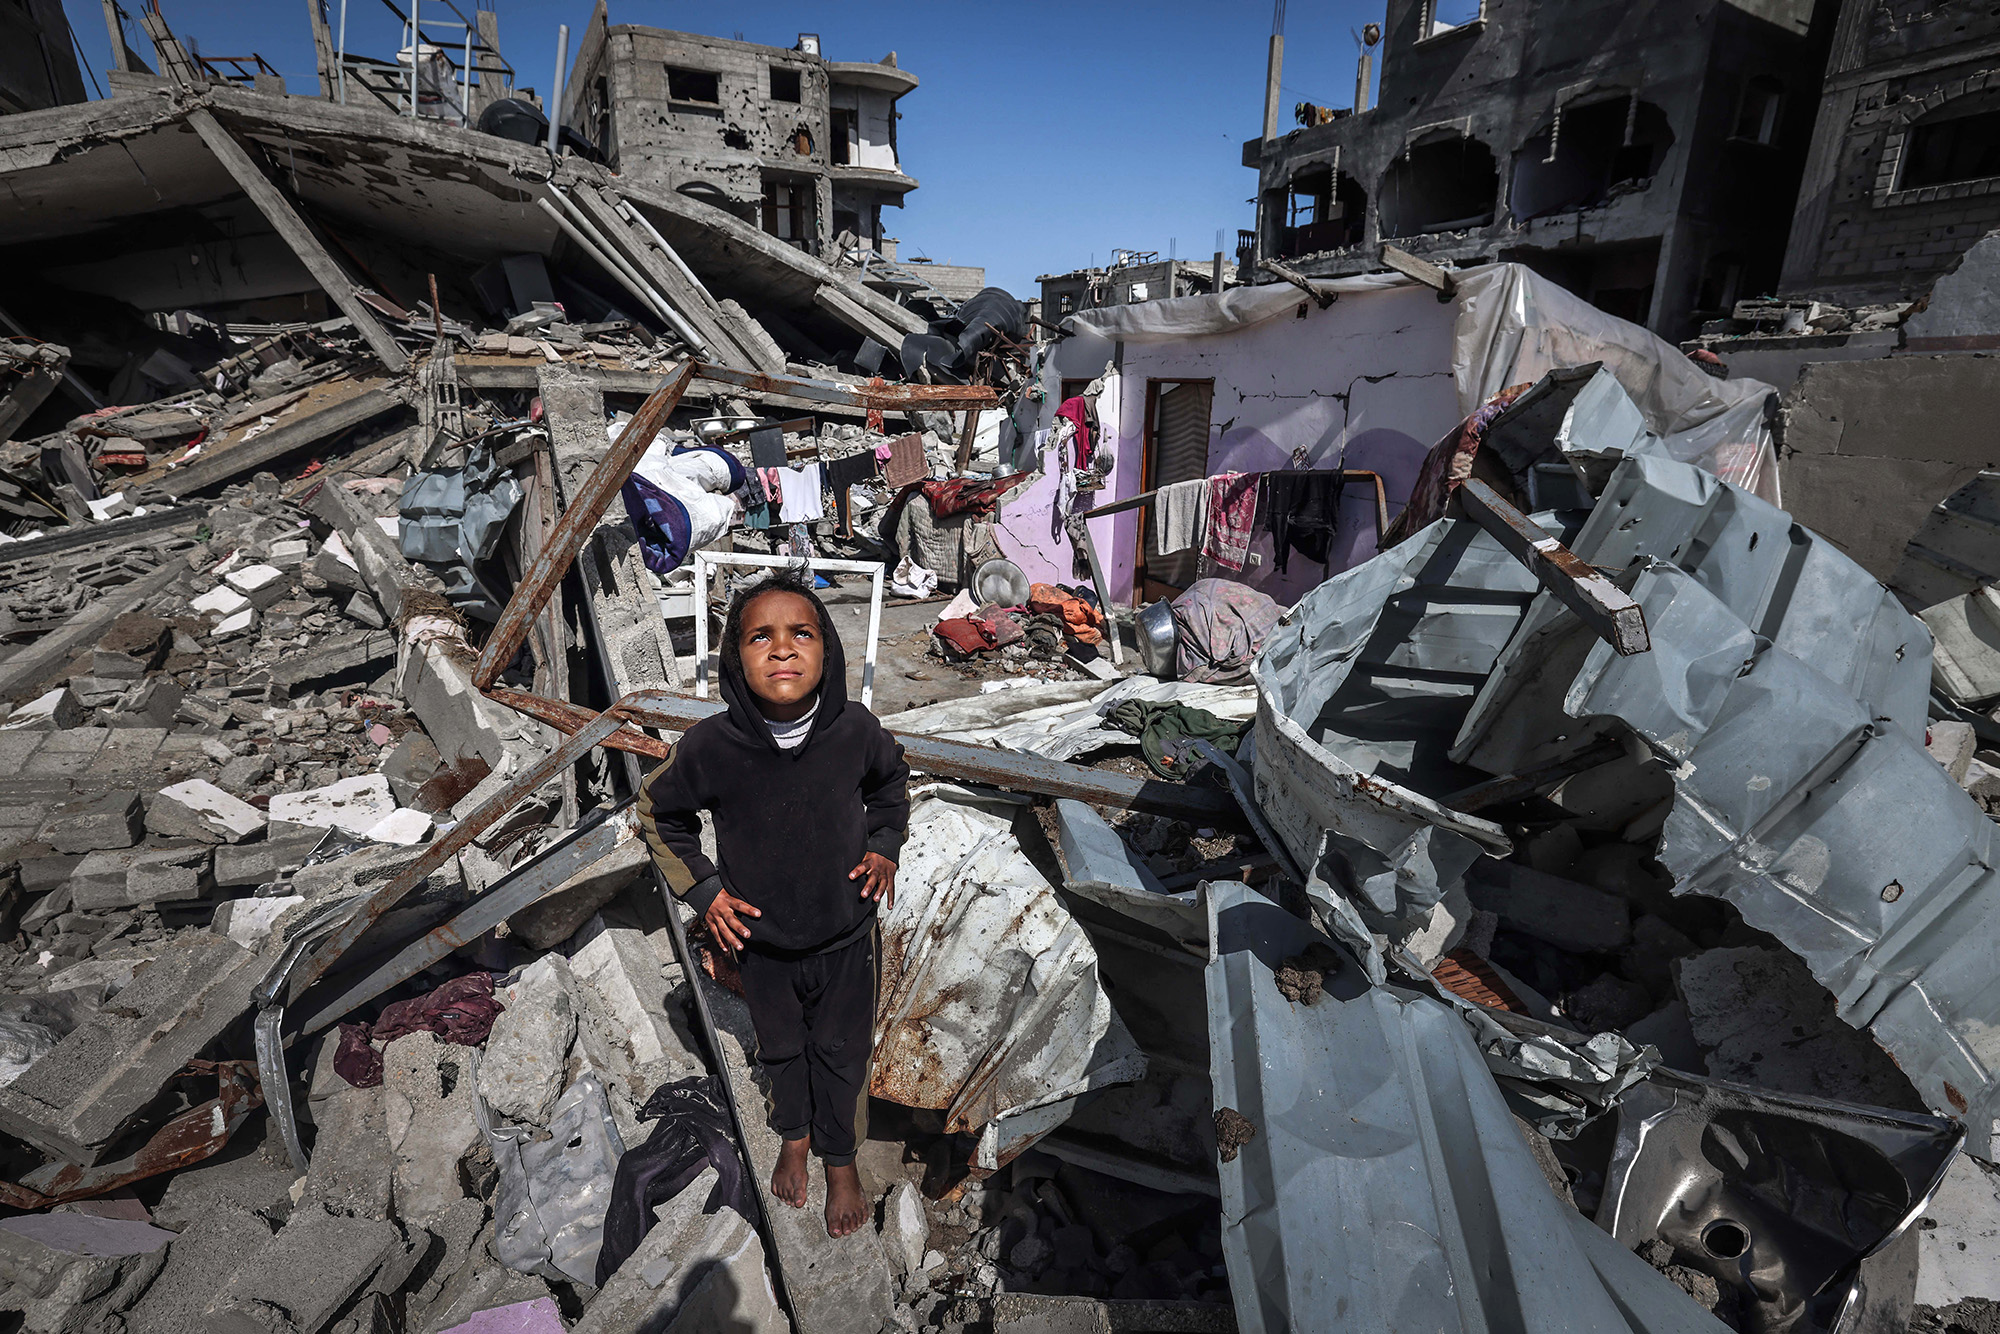 A Palestinian girl looks up to watch a military drone as she stands on the rubble of destroyed houses in the Rafah refugee camp in Gaza on March 21.